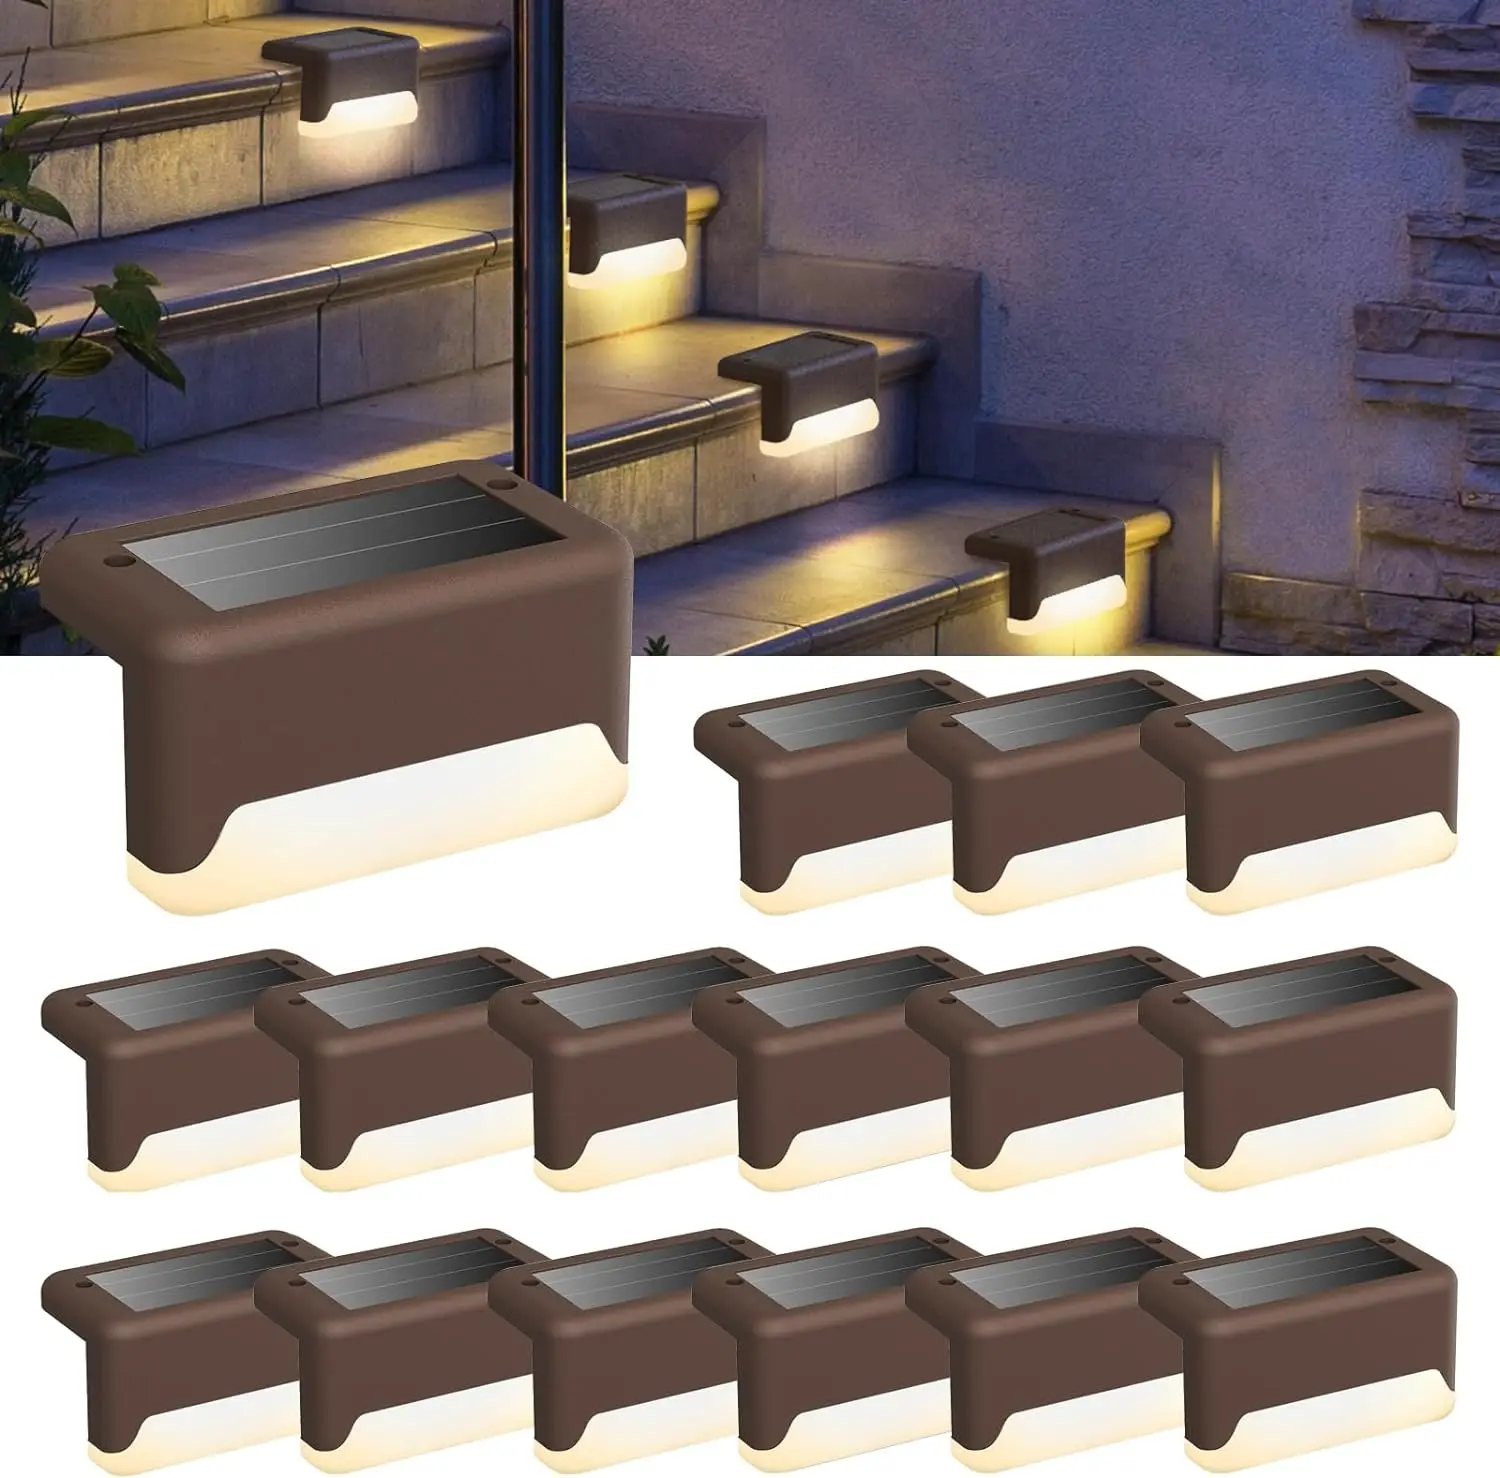 

Solar Deck Lights Outdoor Step Lights Waterproof LED Solar Lamp for Railing Stairs Step Fence Yard Patio Garden Pathway Decor